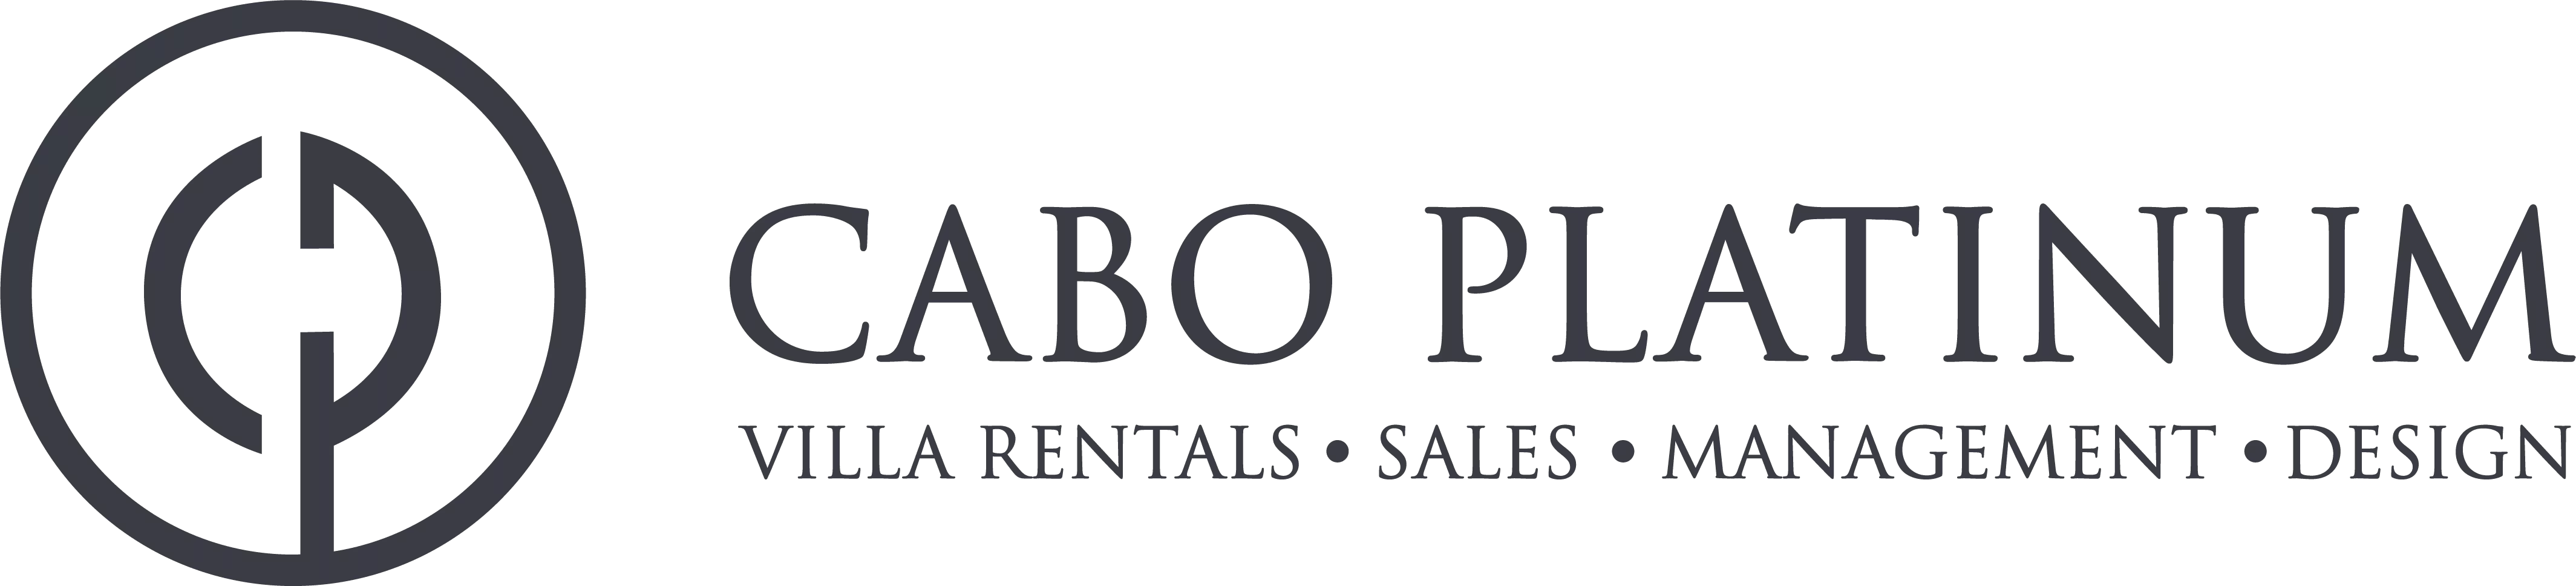 Cabo Platinum partnering with THIRDHOME